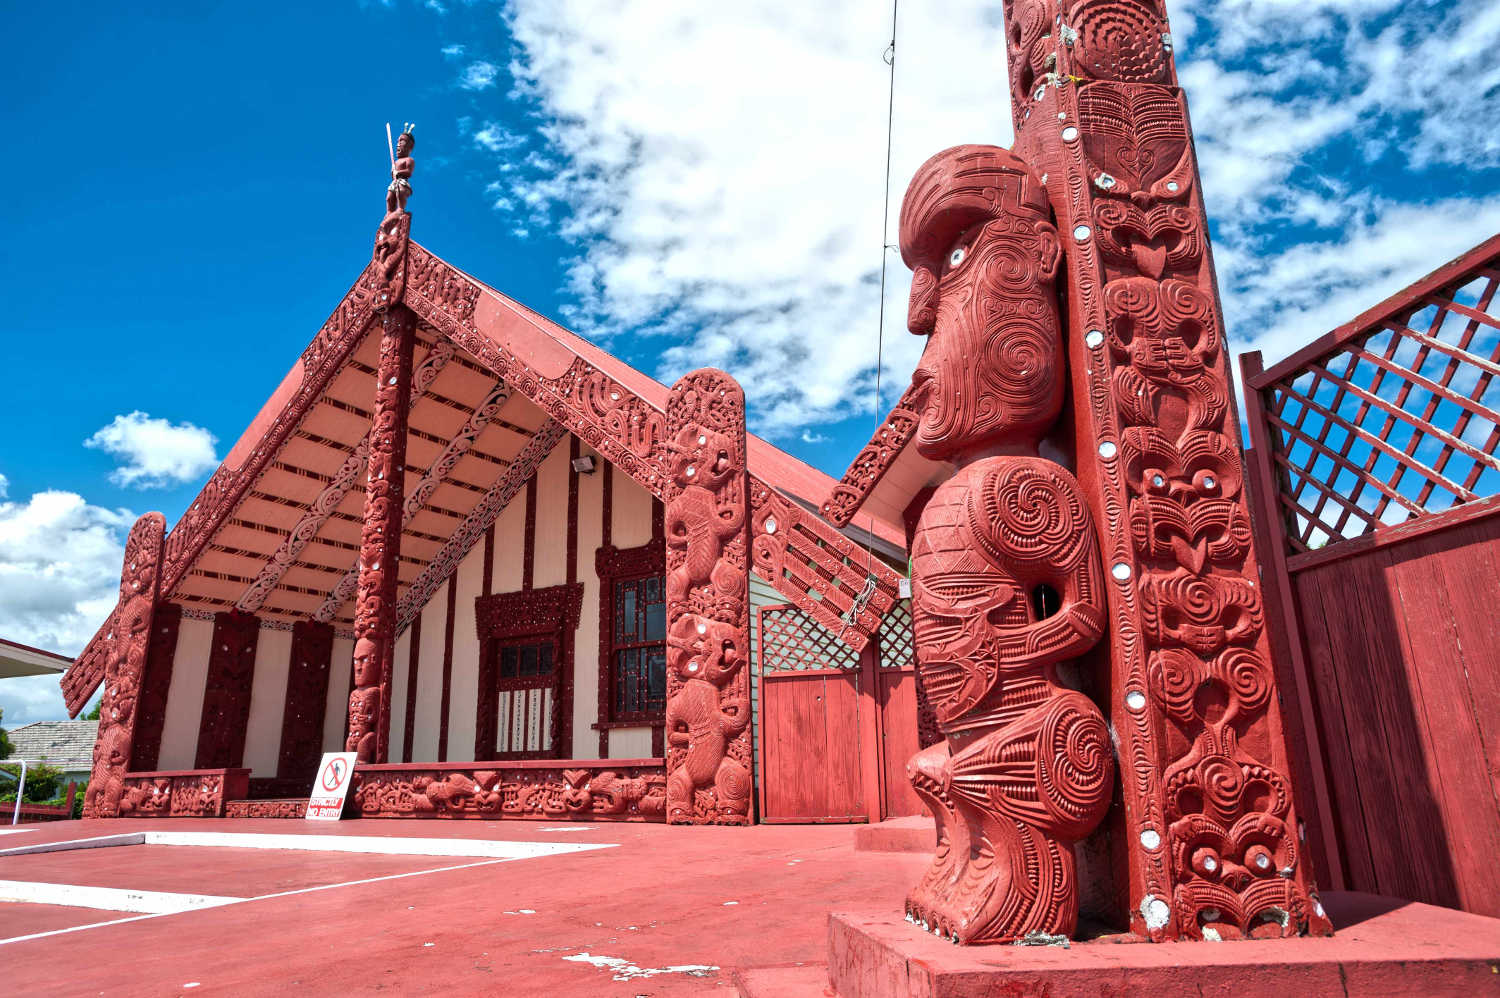 This image shows a maori marae (meeting house and meeting ground), New Zealand